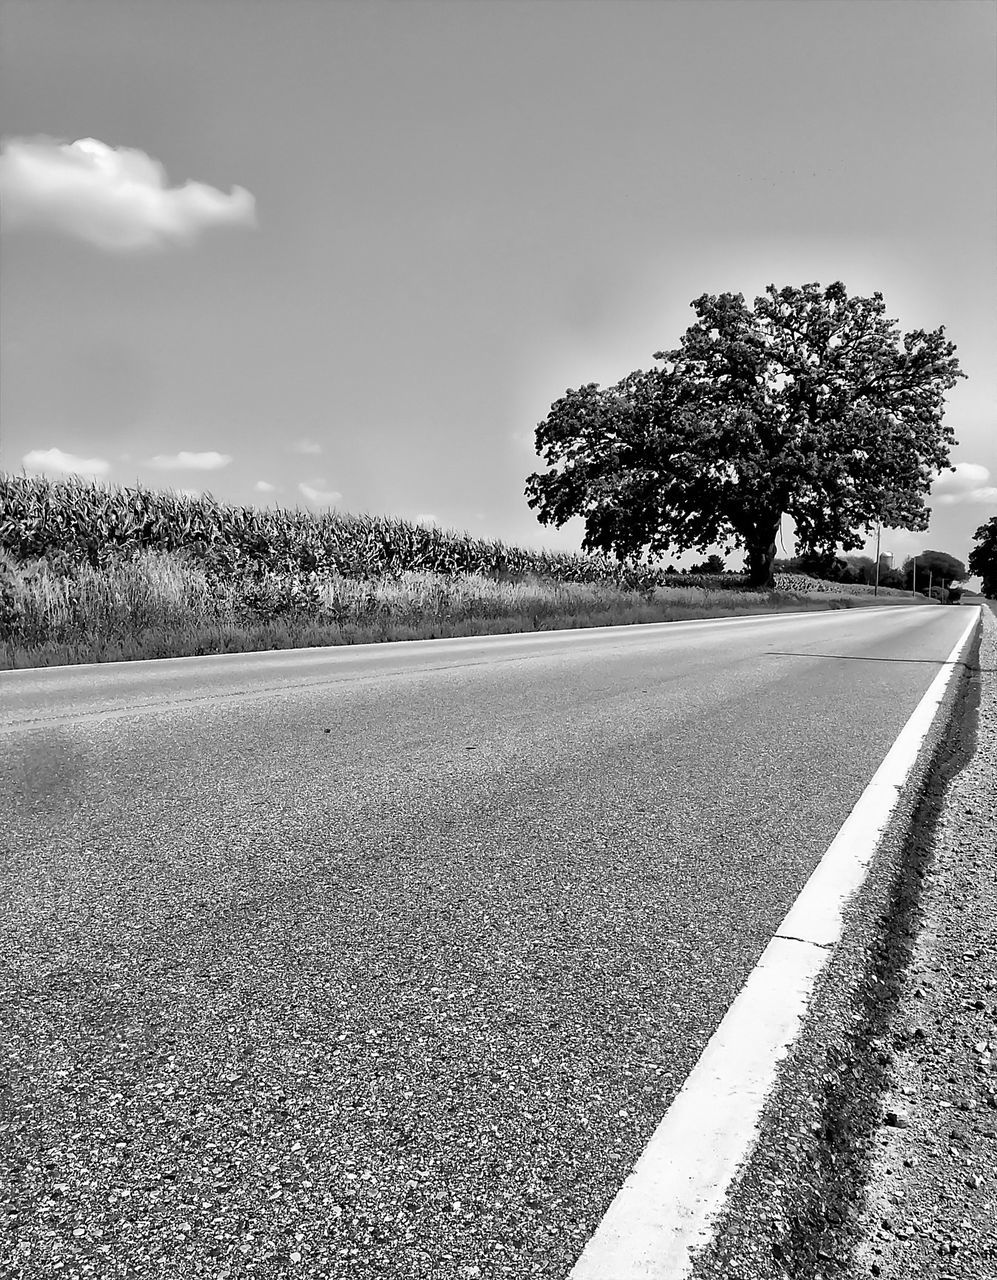 the way forward, road, transportation, tree, road marking, diminishing perspective, sky, vanishing point, asphalt, empty road, tranquility, surface level, tranquil scene, country road, street, clear sky, empty, nature, long, day